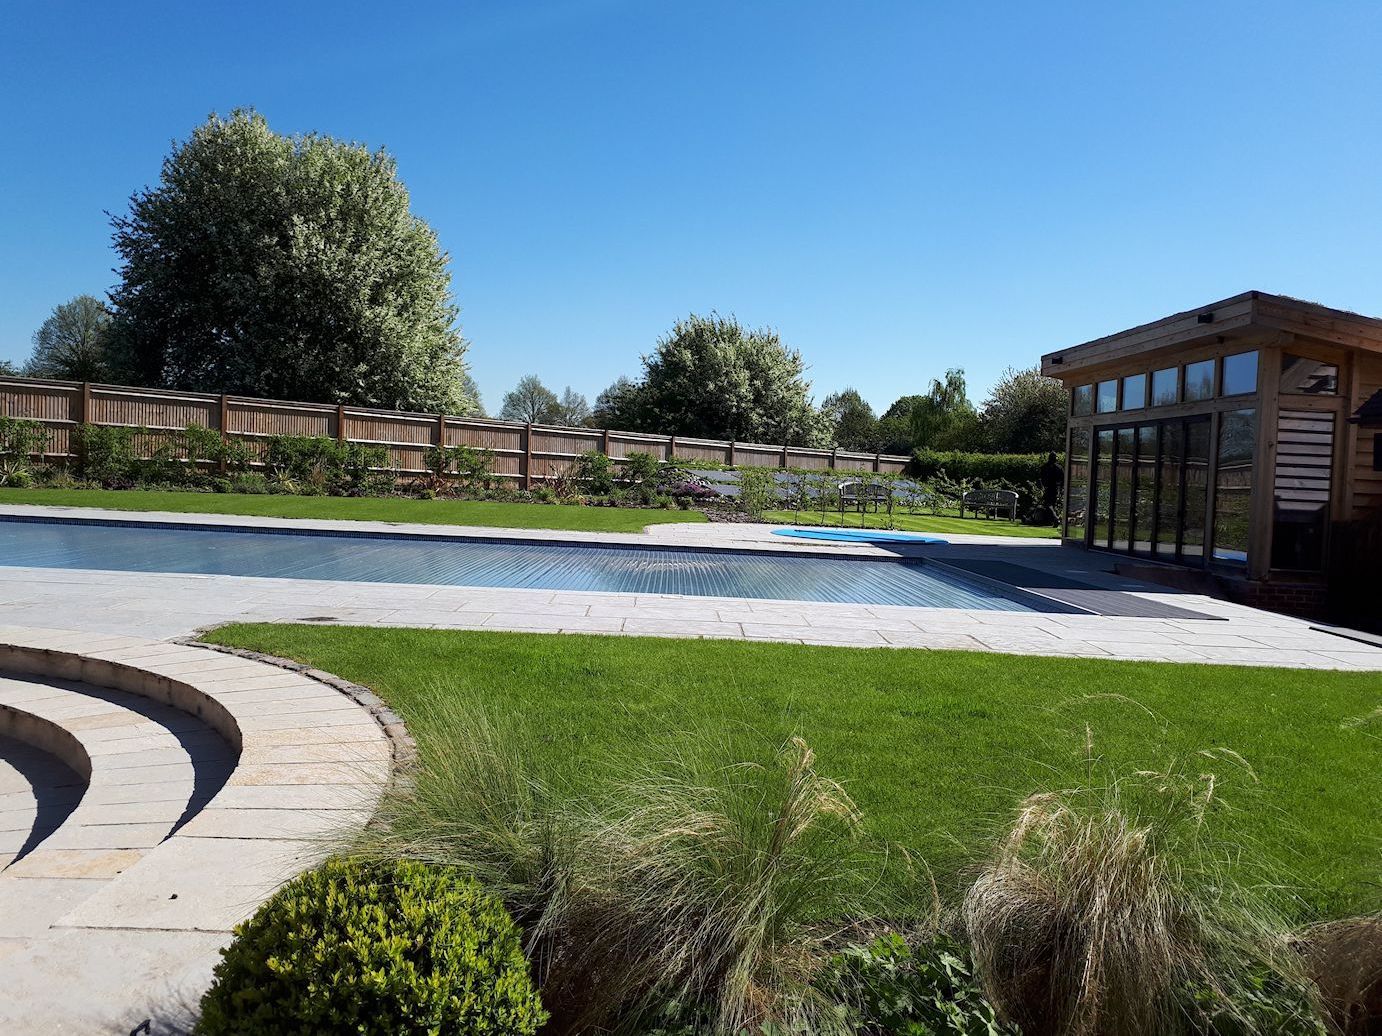 Garden design in Denham, Buckinghamshire with raised swimming pool terrace and curved steps.